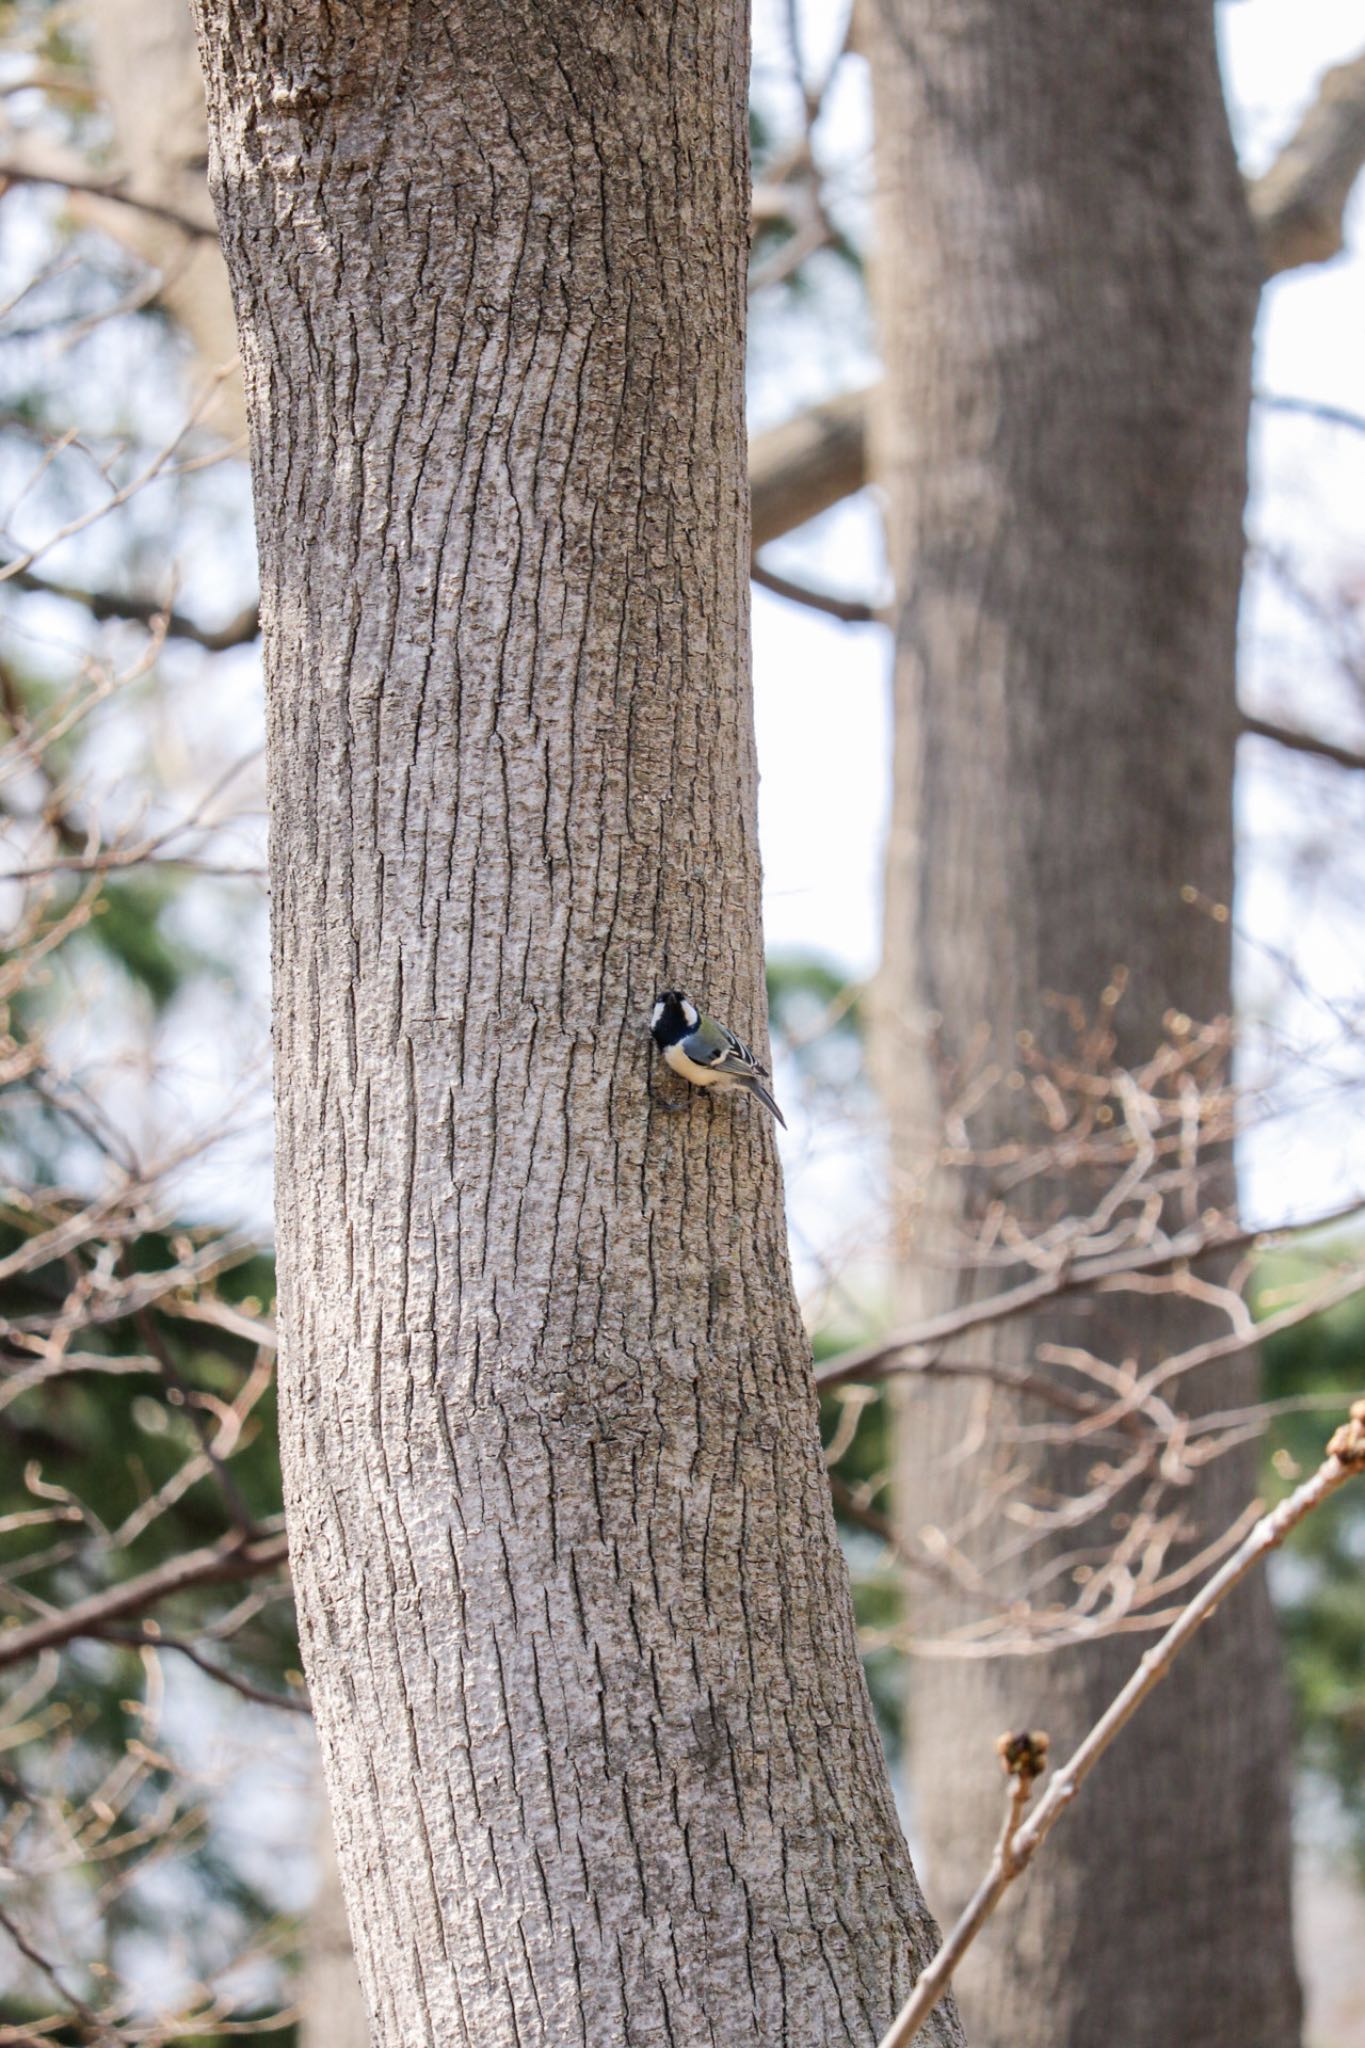 Photo of Japanese Tit at 豊平公園(札幌市) by お散歩記録